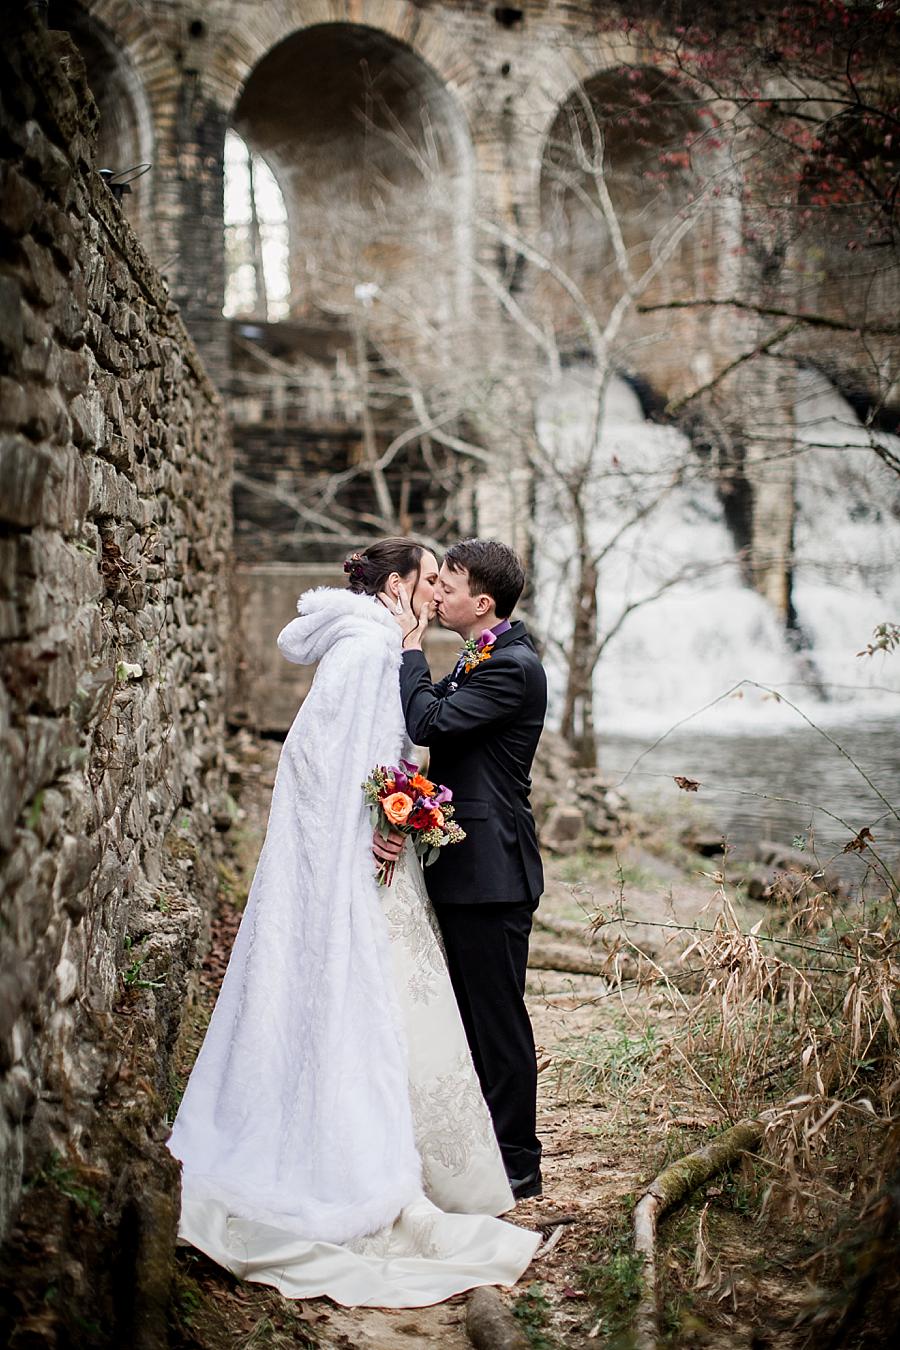 Groom's hands on bride's cheeks kissing her slowly at this Cumberland Mountain State Park wedding by Knoxville Wedding Photographer, Amanda May Photos.